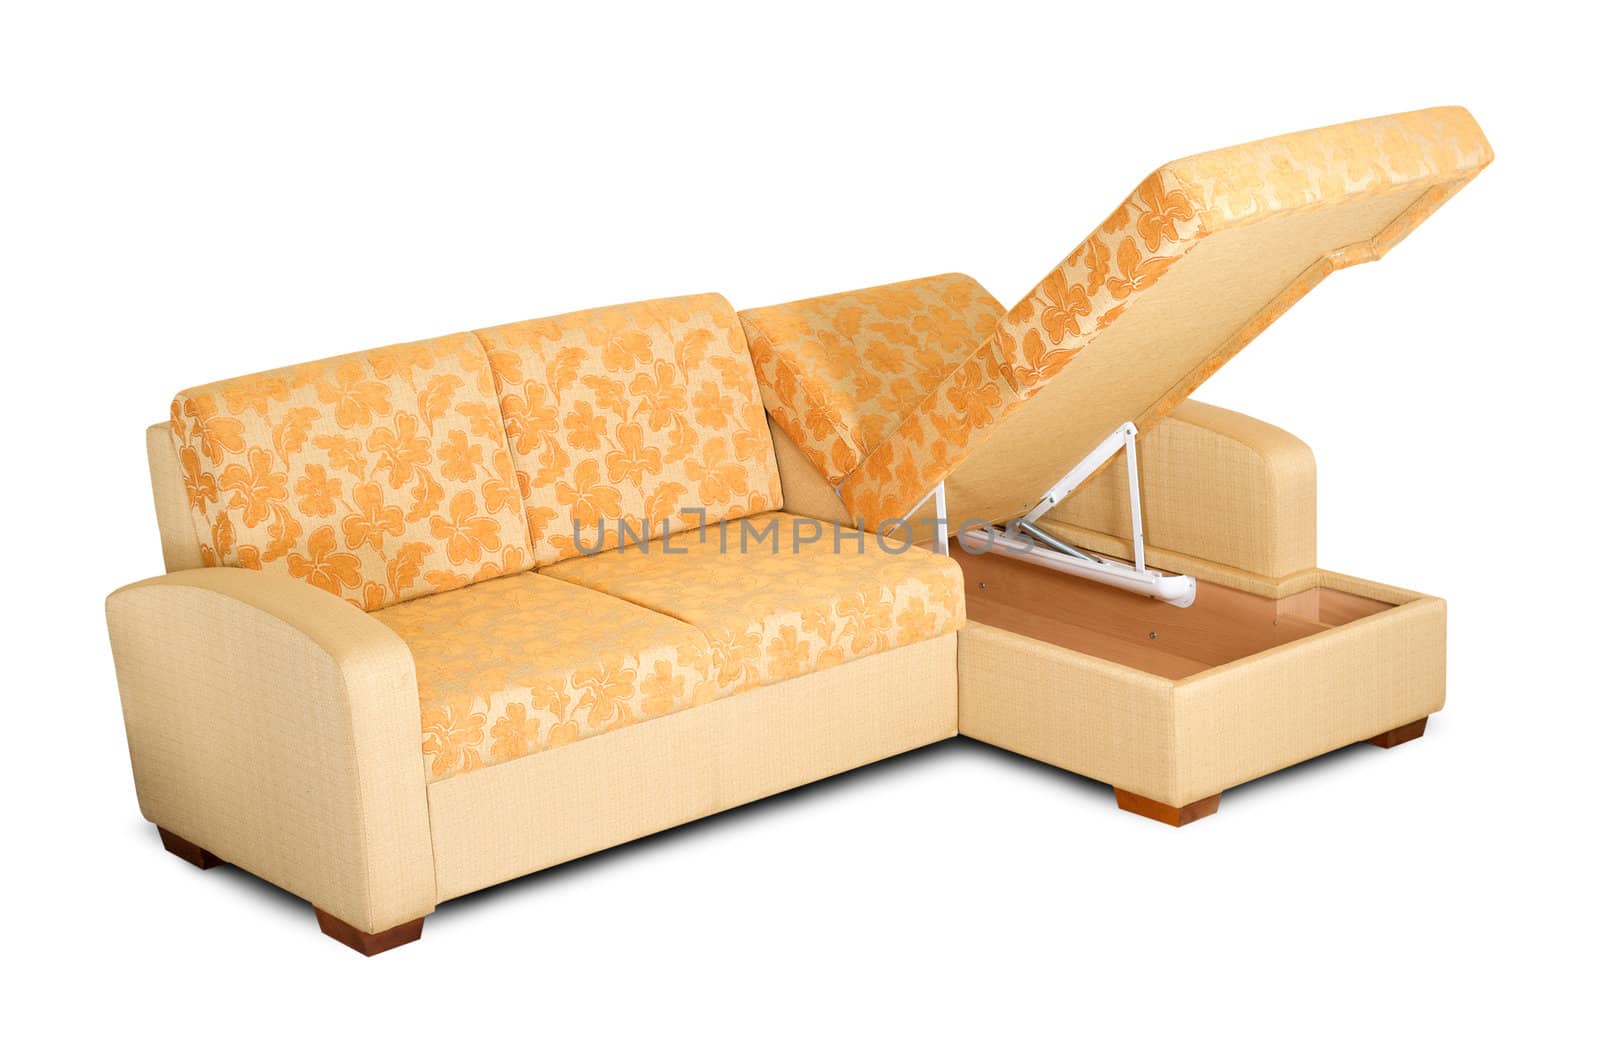 Yellow sofa with an open box isolated on a white background.